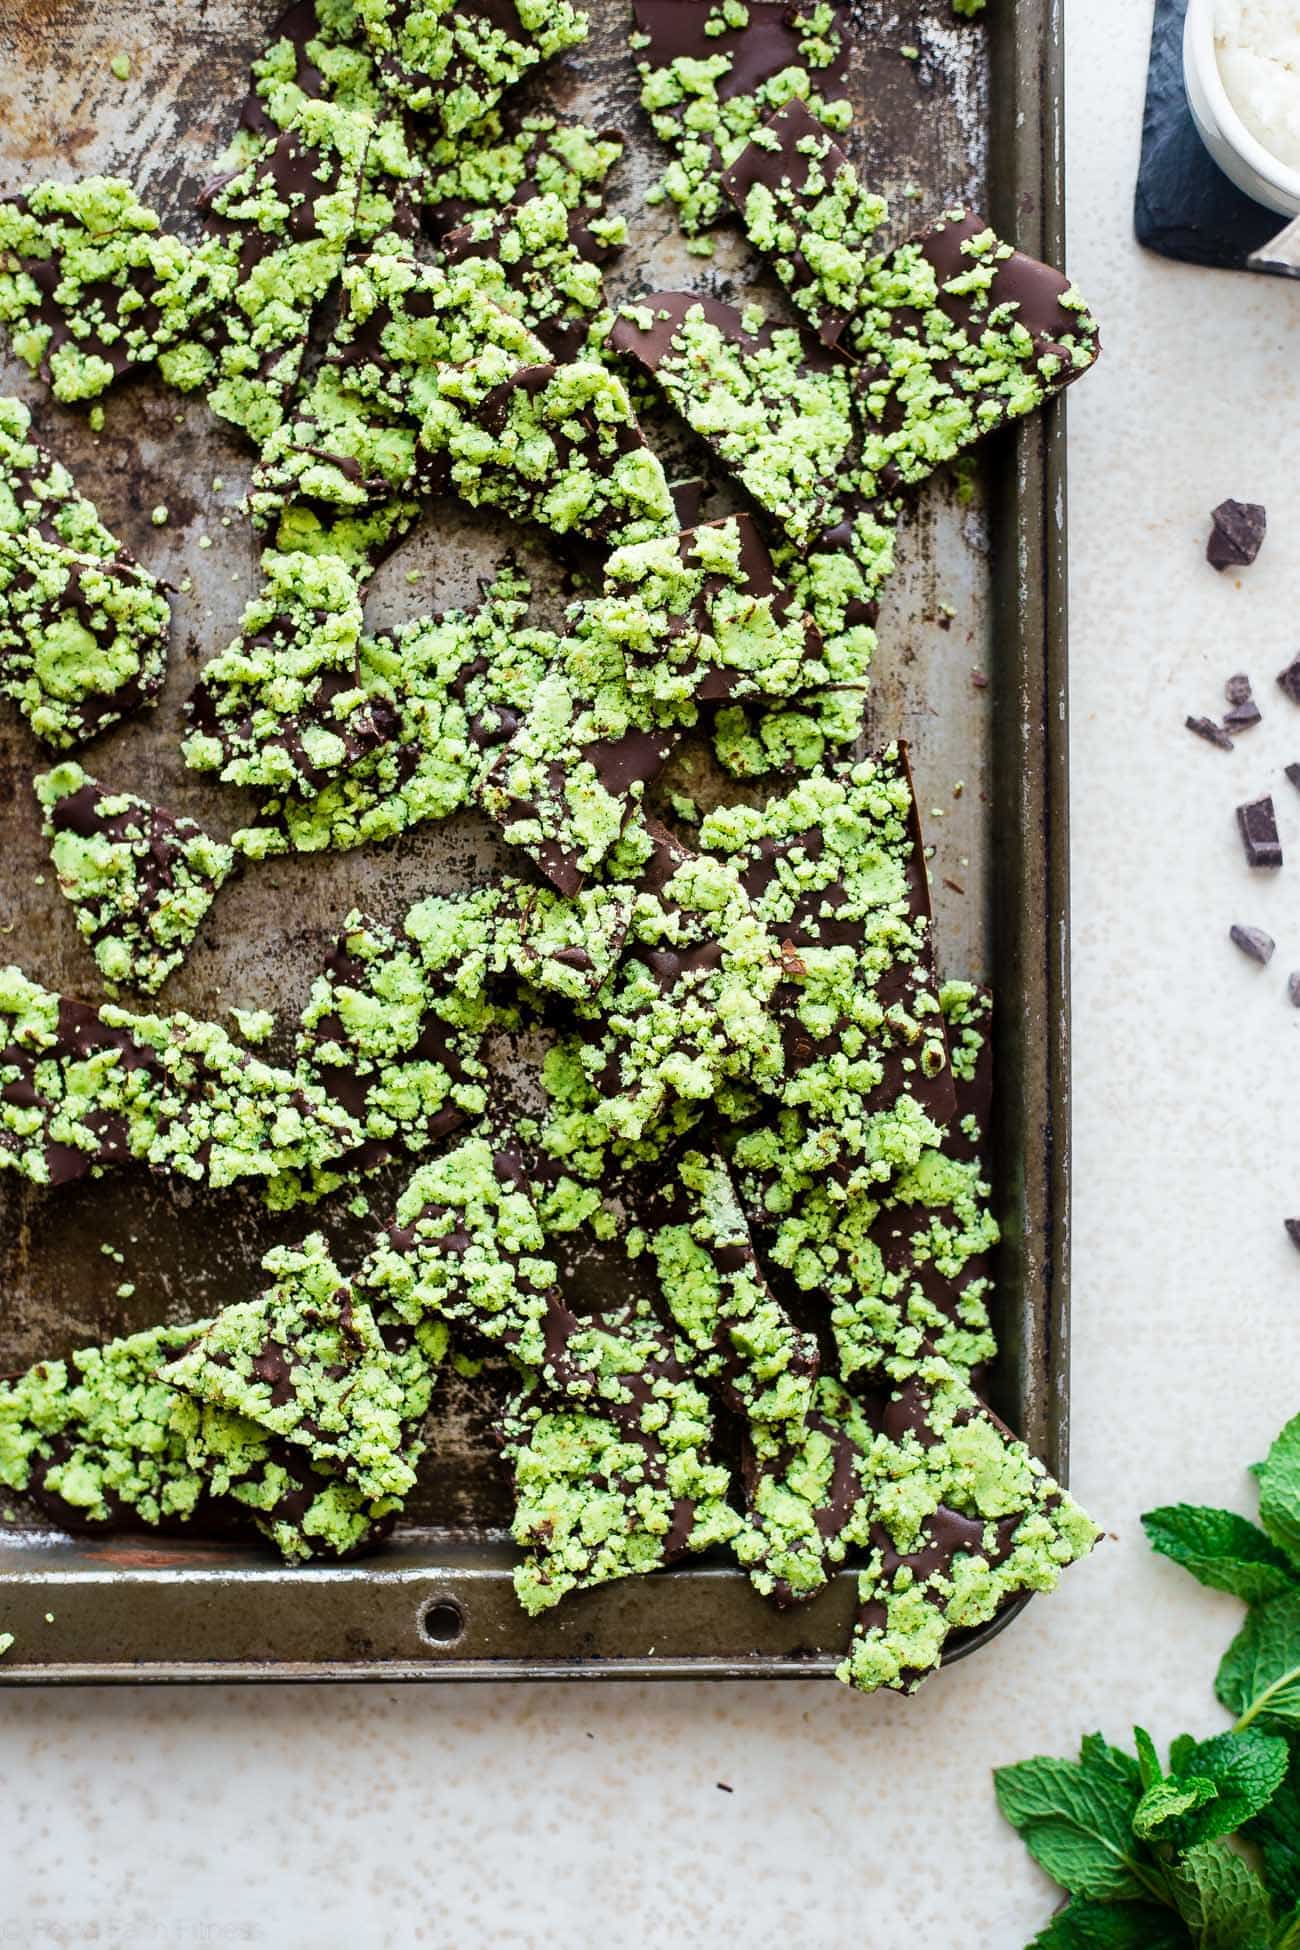 Vegan Peppermint Bark - This peppermint bark is ready in 15 minutes and only has 6 ingredients! Its a quick and easy, healthy and paleo friendly Christmas food gift or dessert! | Foodfaithfitness.com | @FoodFaithFit